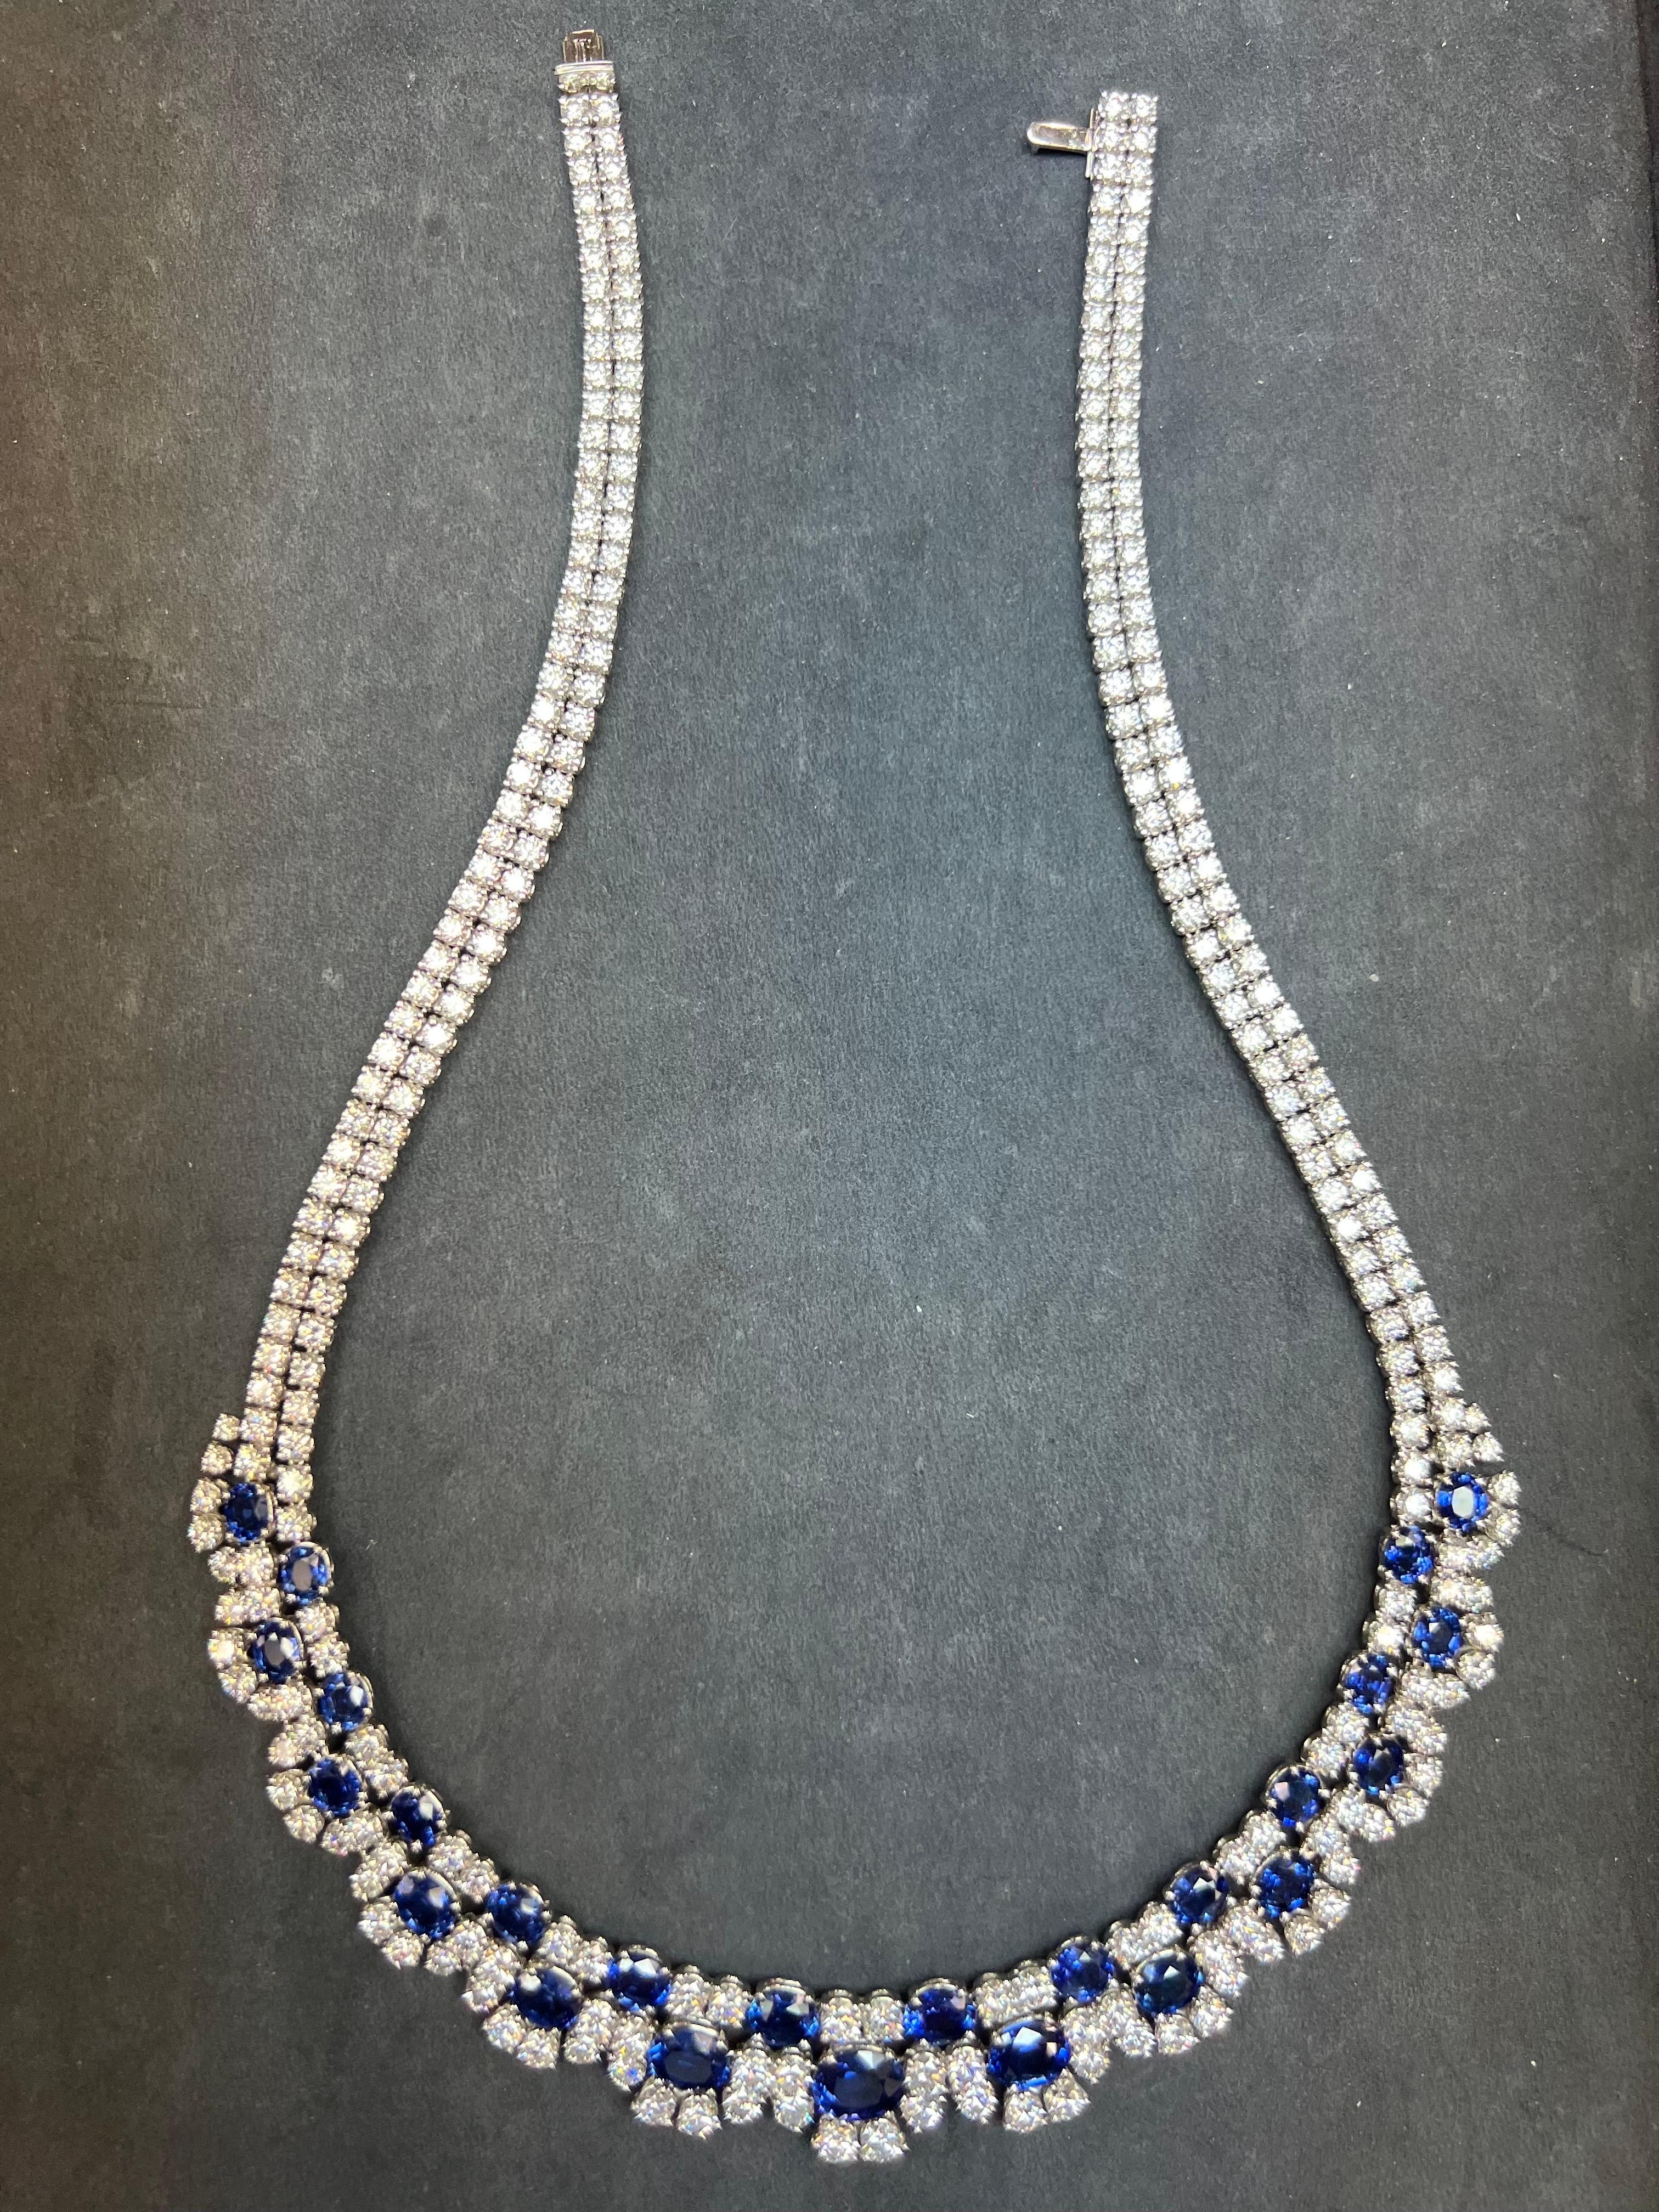 Modern Gold 37 Carat Natural Colorless Diamond & Blue Sapphire Italian Necklace In Good Condition For Sale In Los Angeles, CA